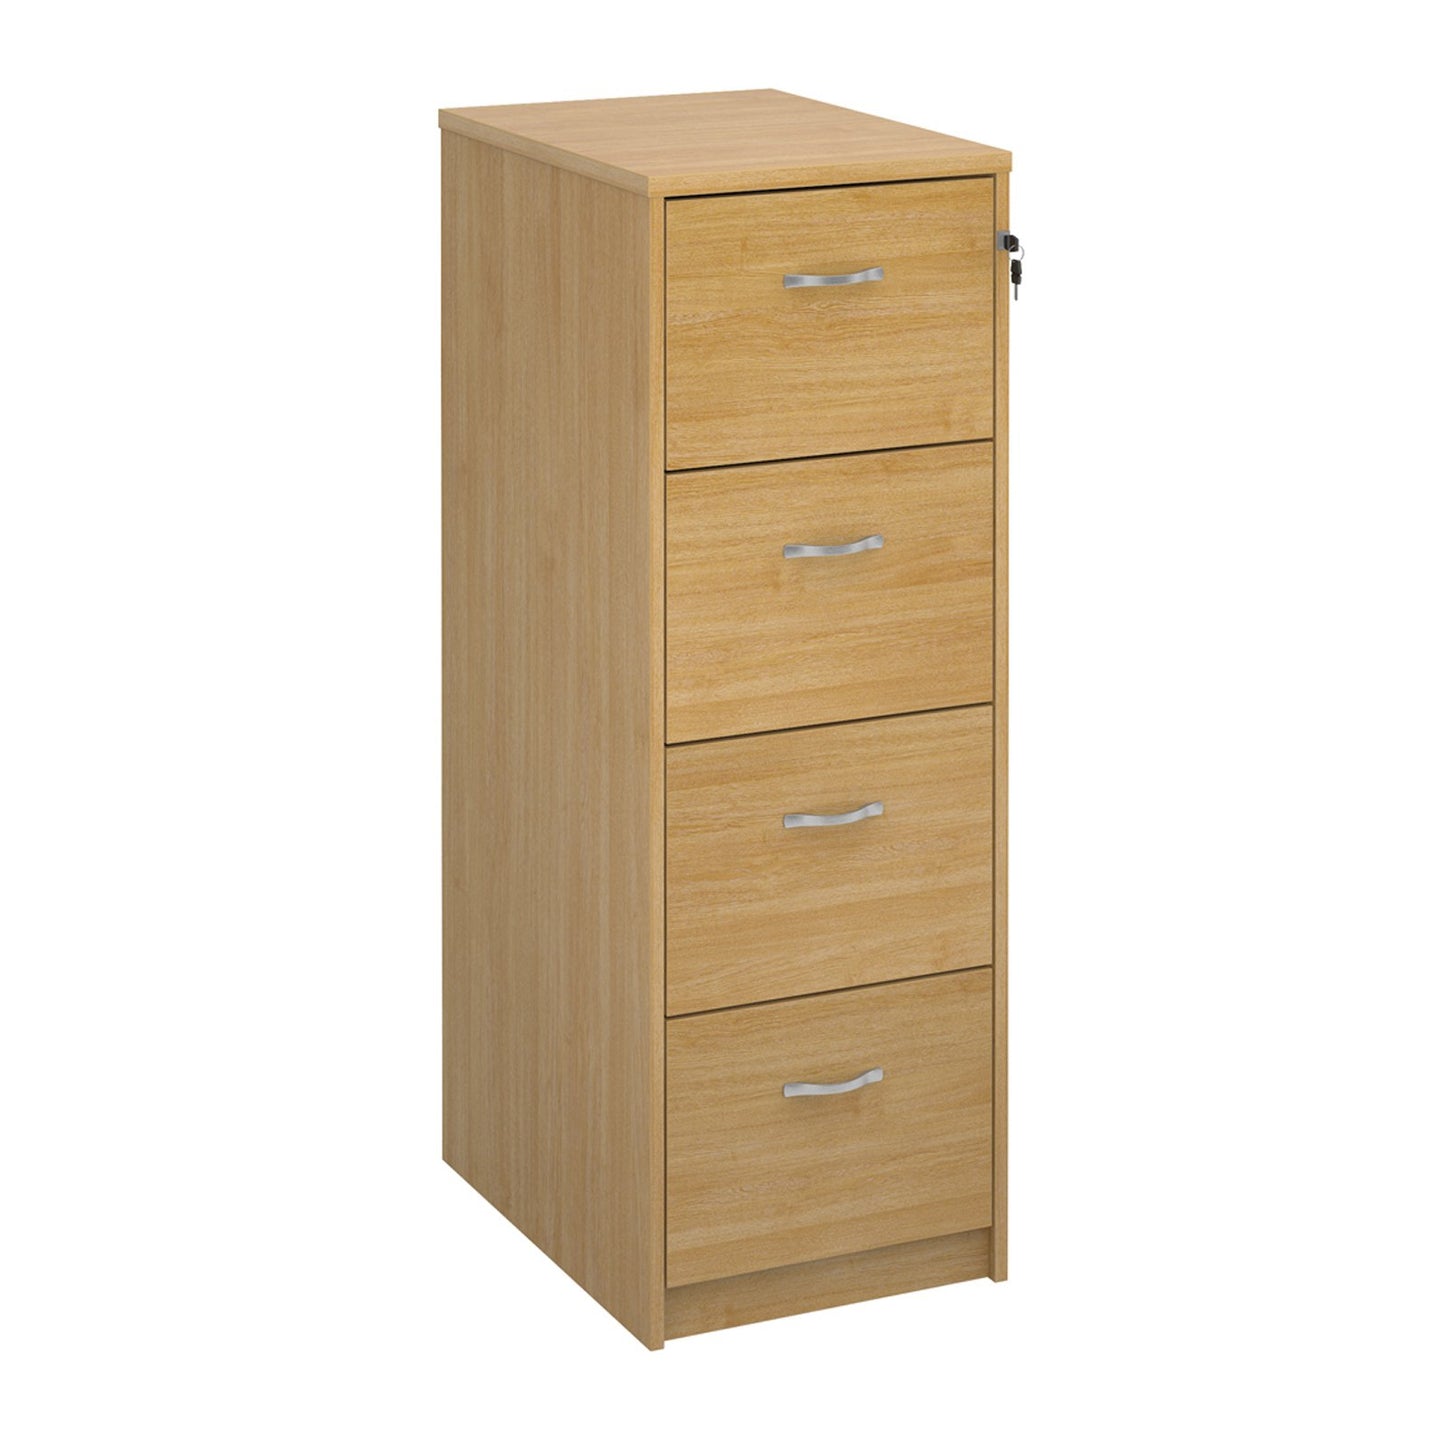 Wooden filing cabinet with silver handles